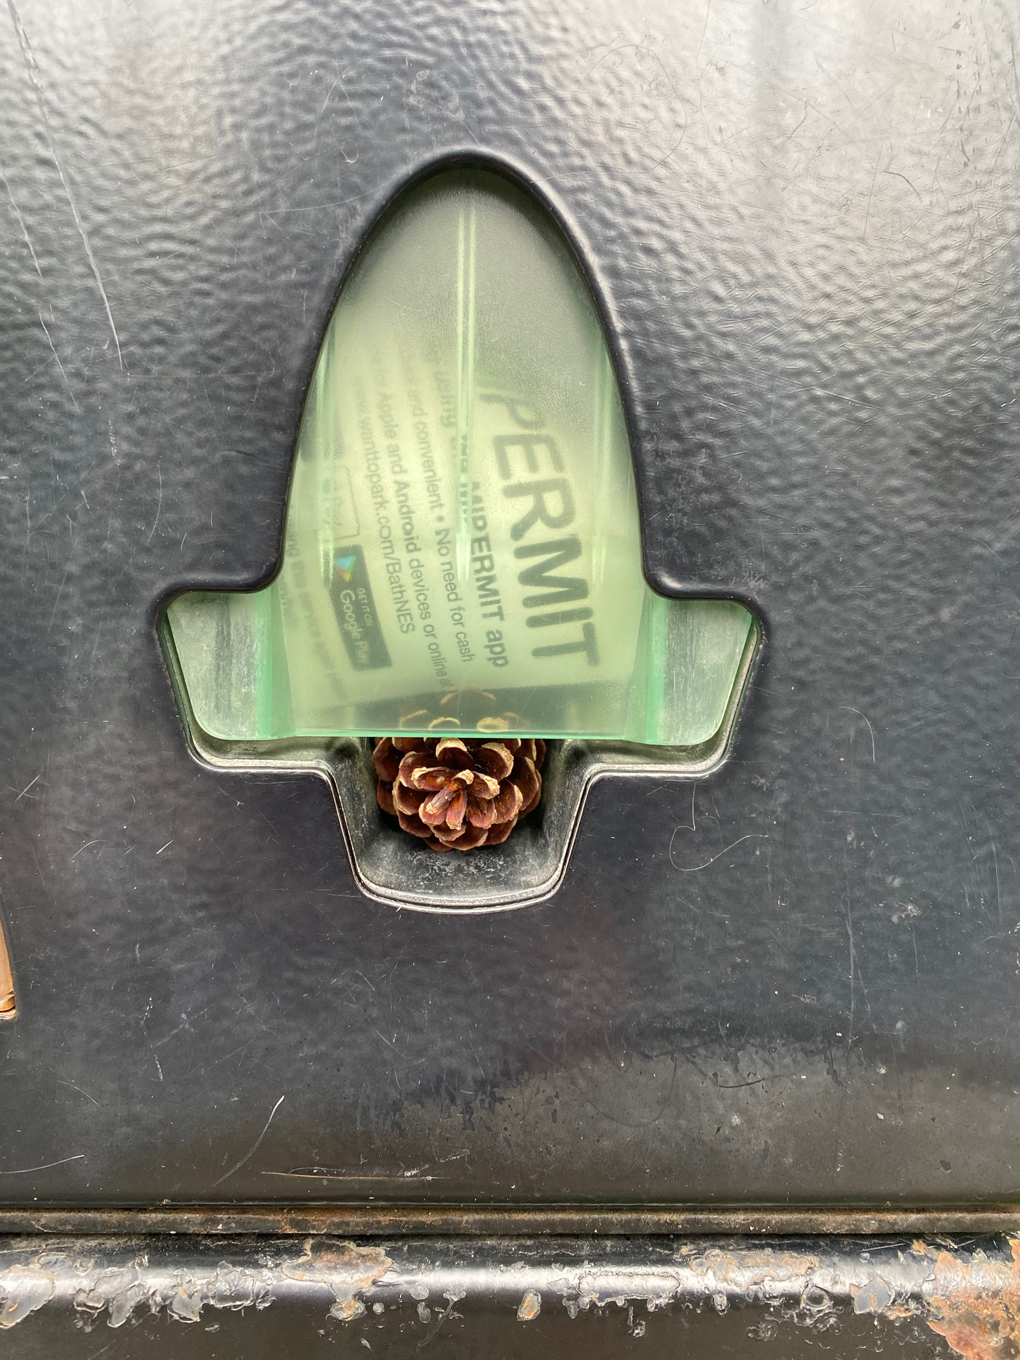 A small brown pinecone pushed into the slot in a ticket machine where the ticket should come out